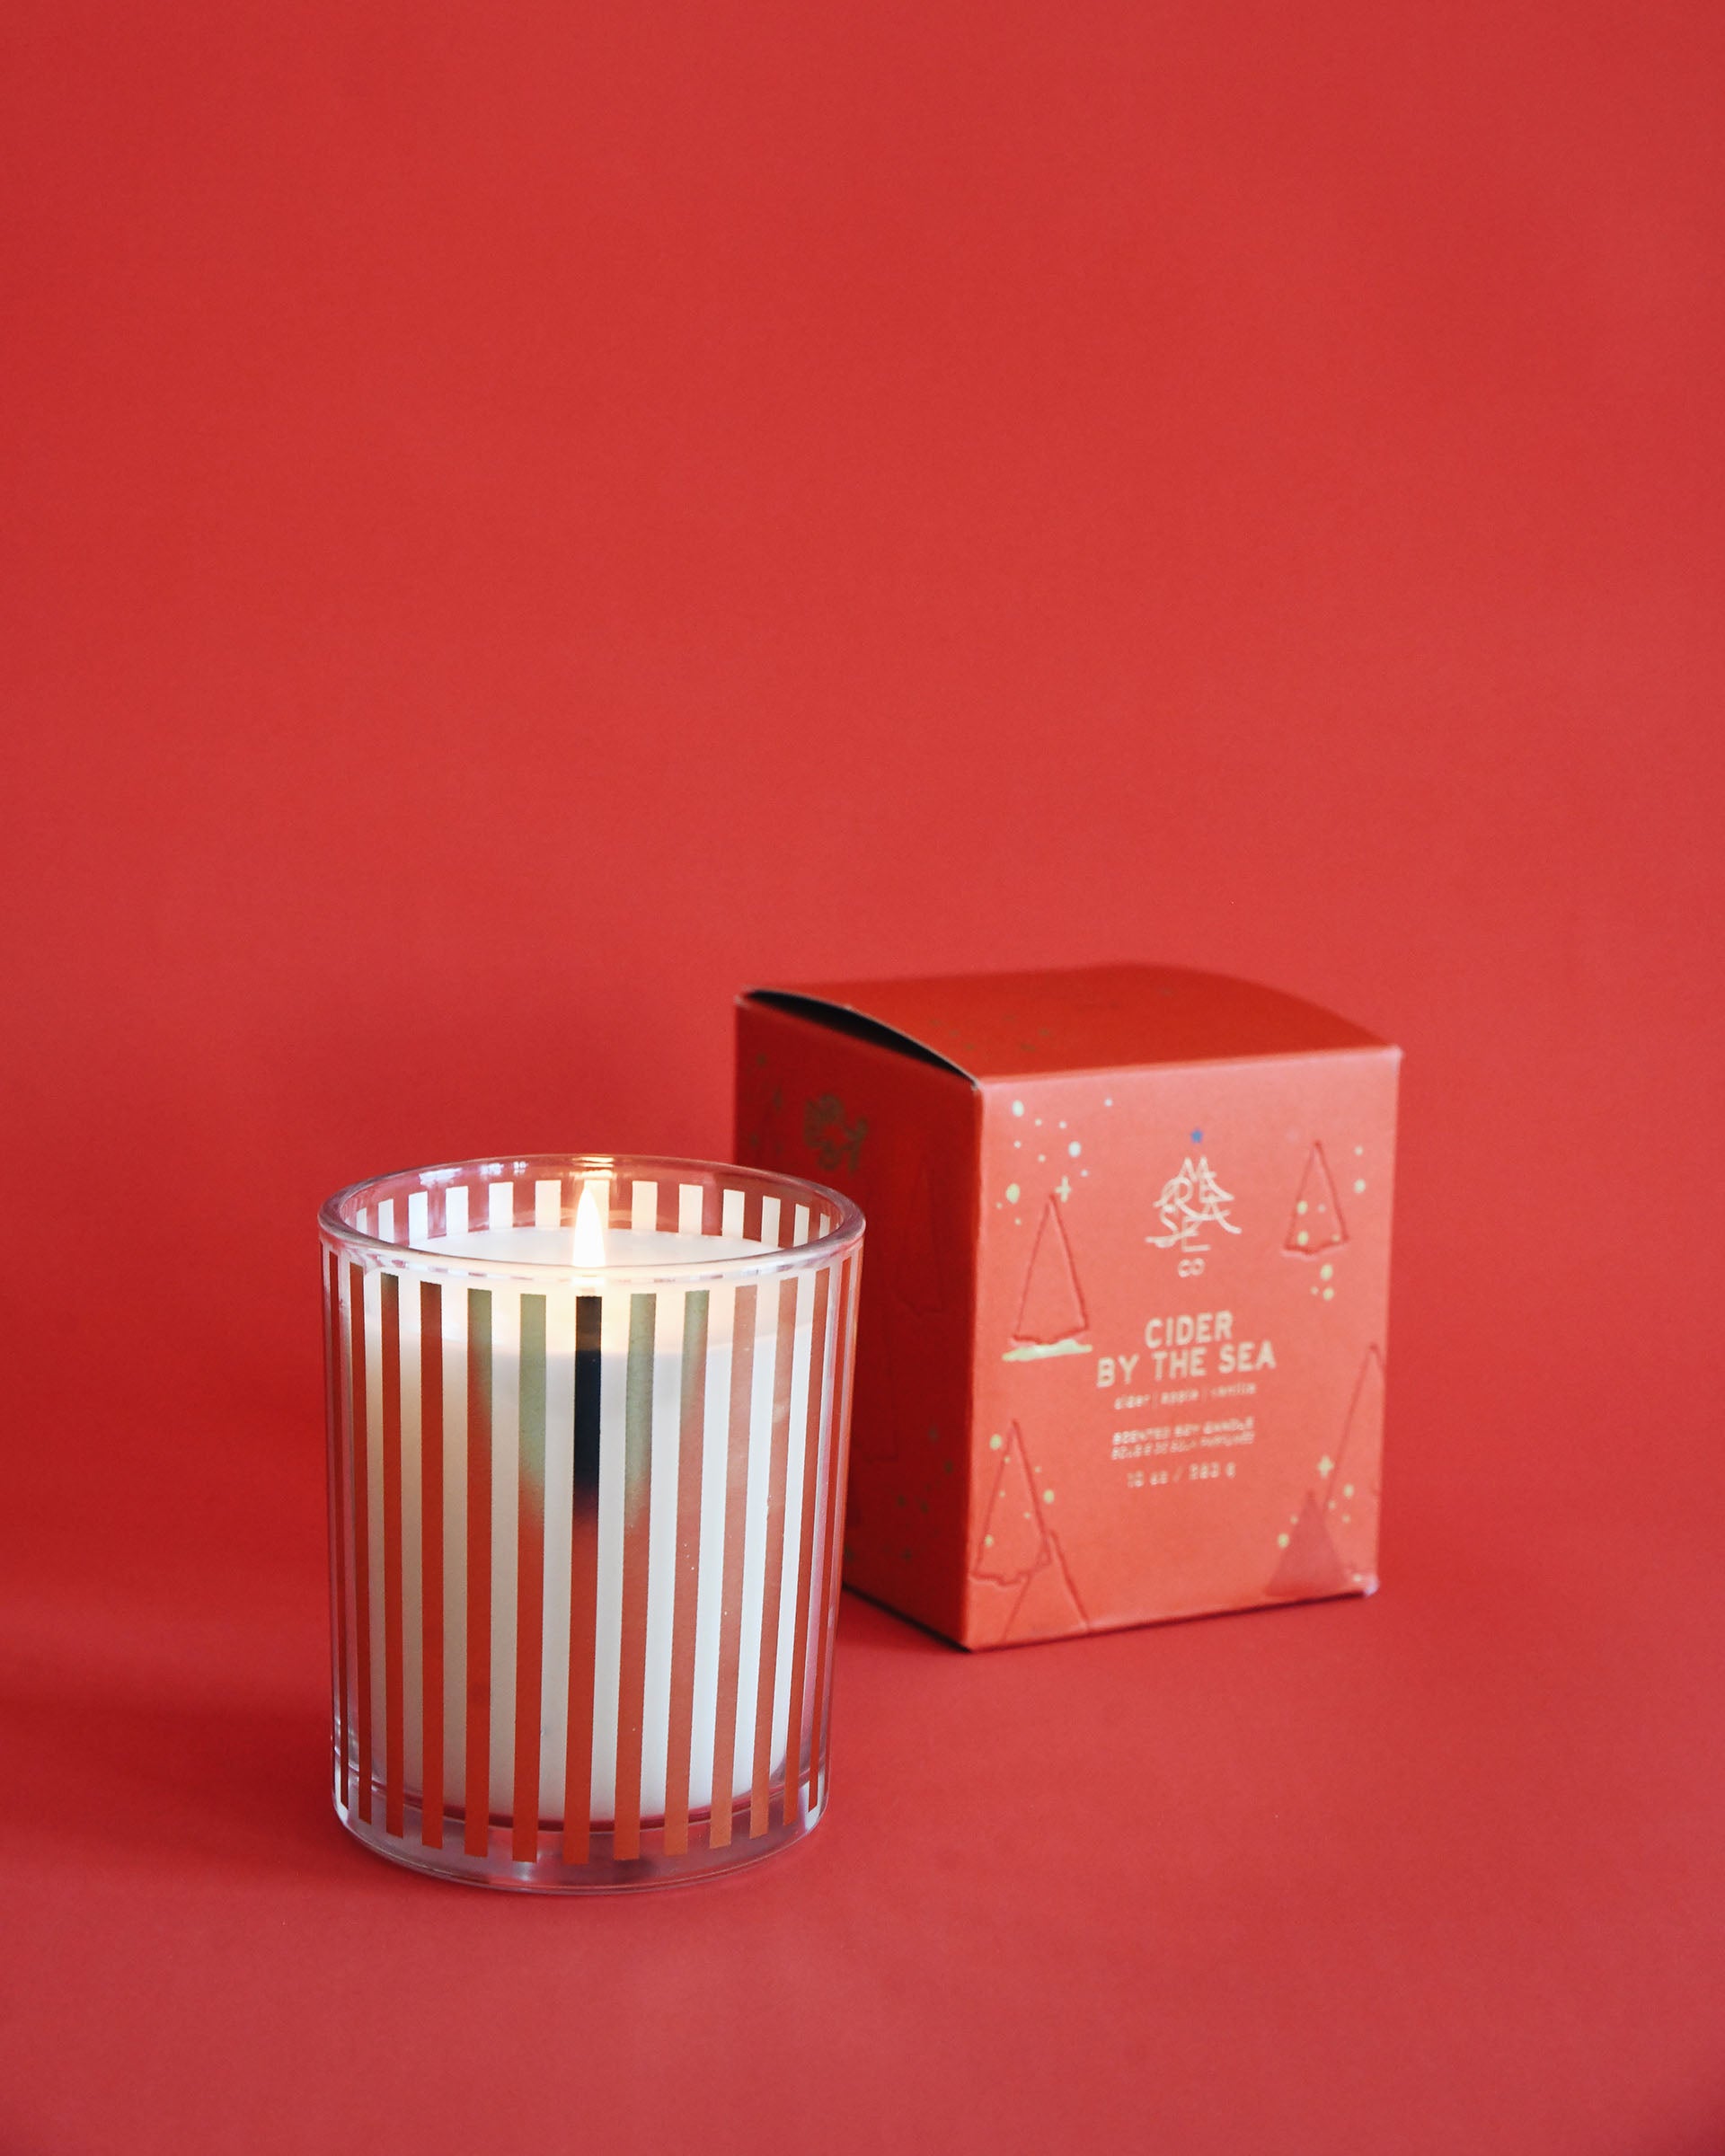 lit mersea cider by the sea holiday boxed candle next to candle box